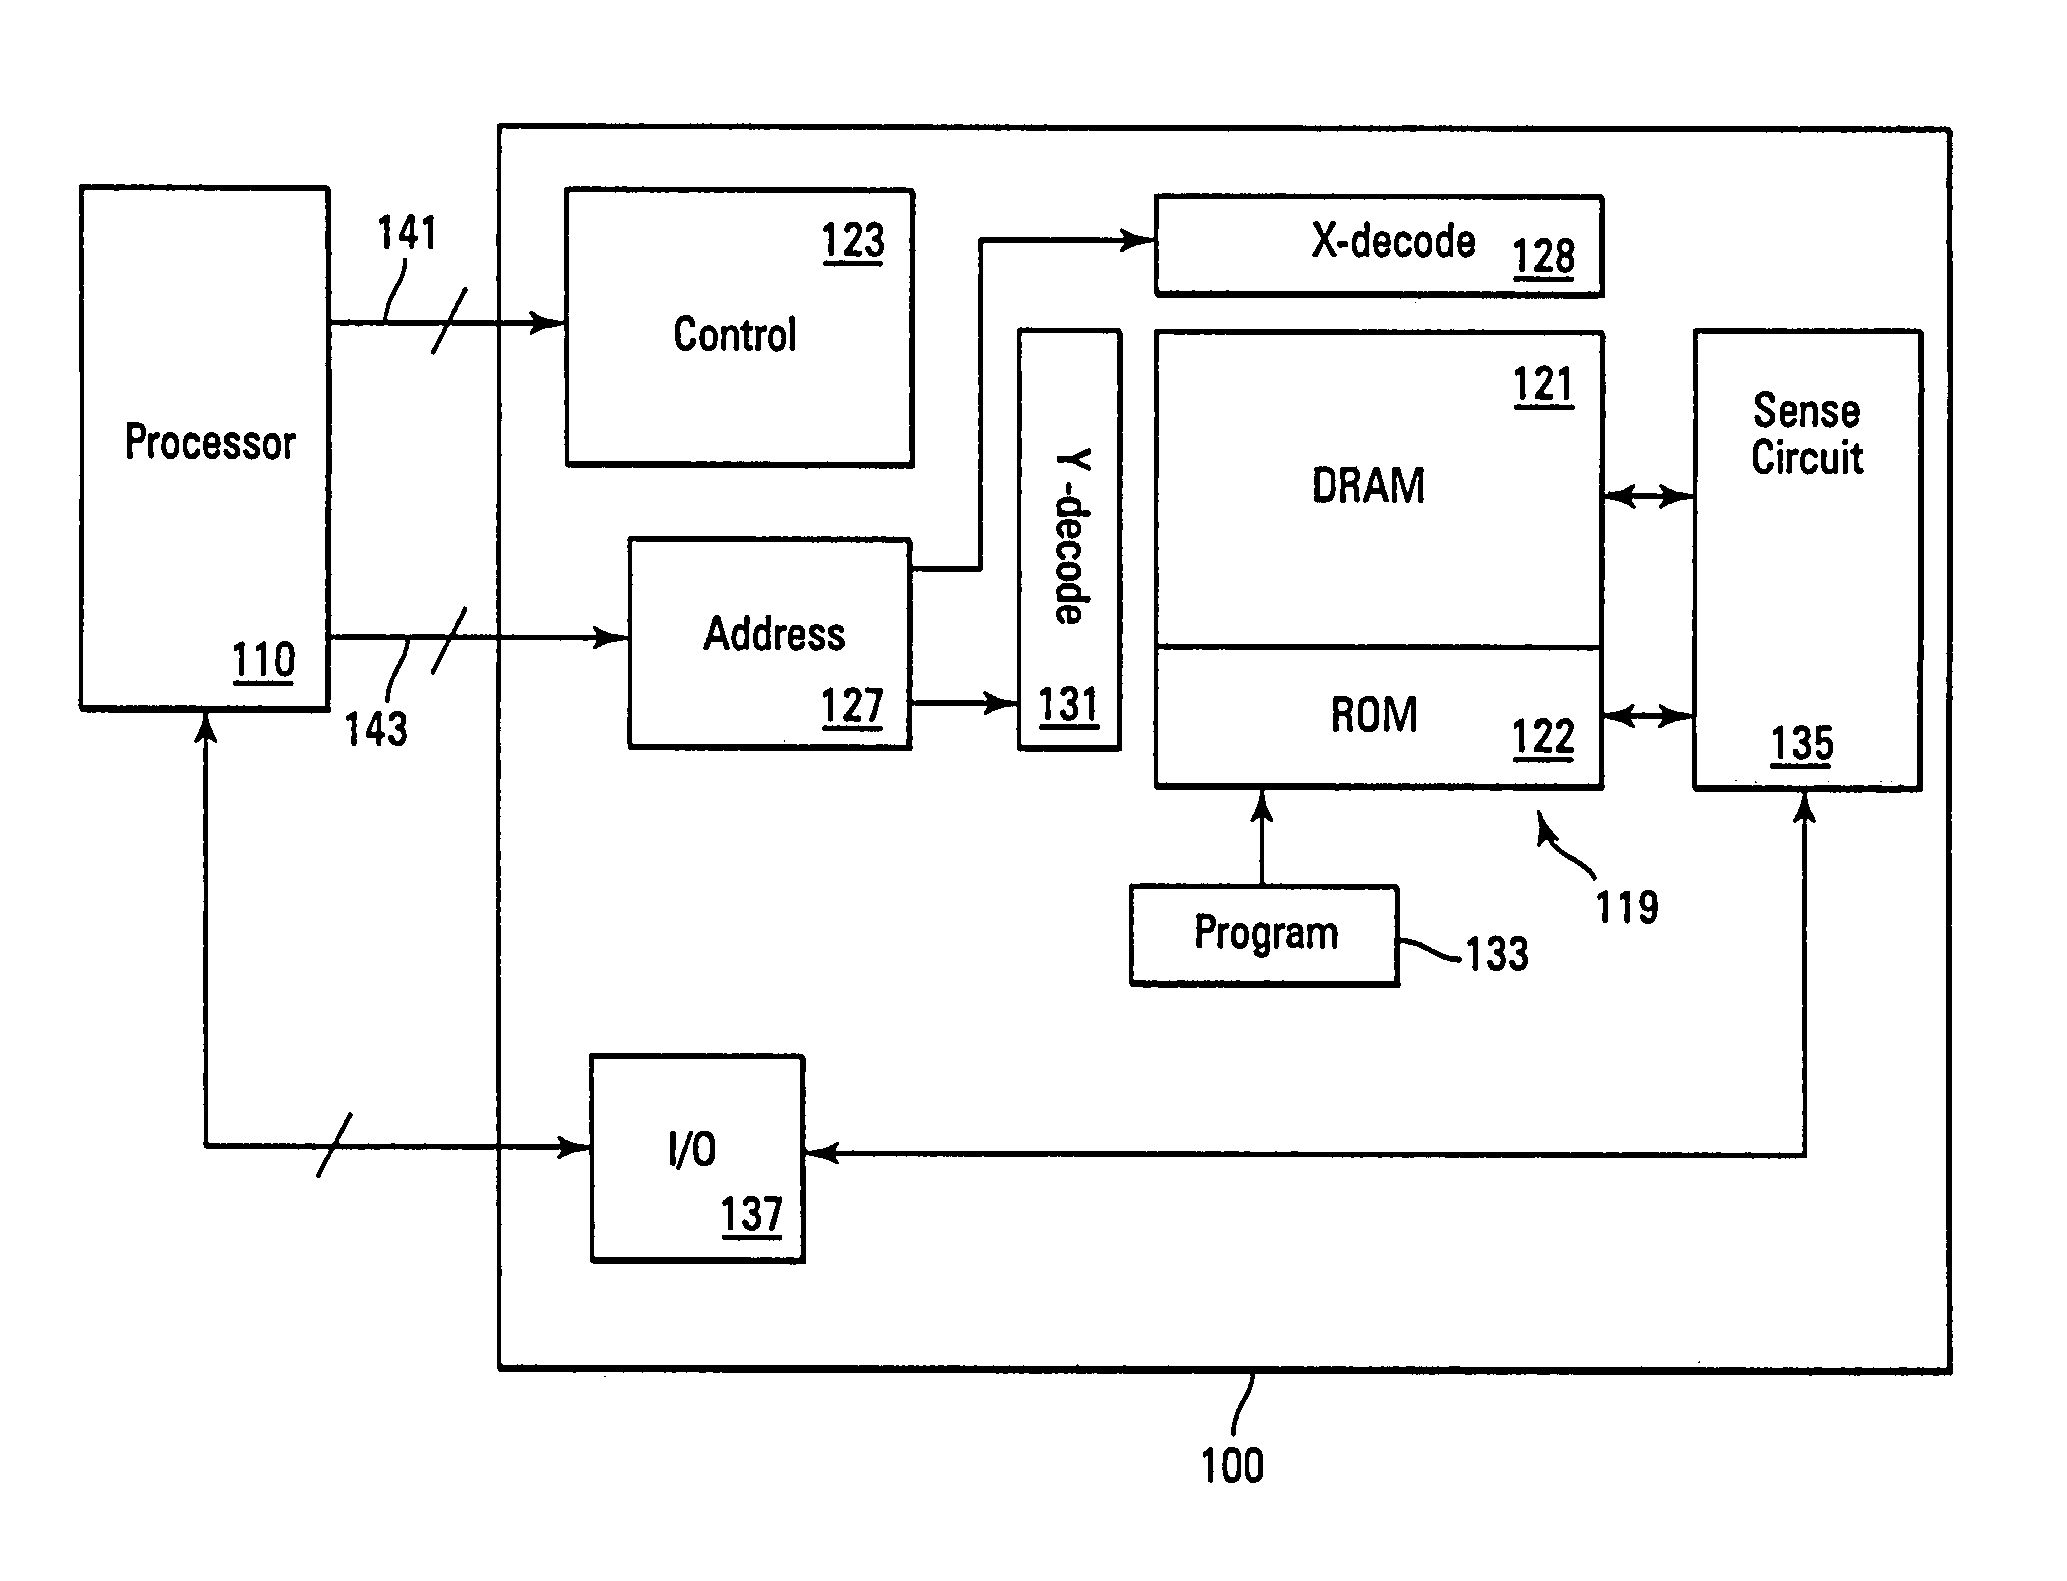 ROM embedded DRAM with anti-fuse programming